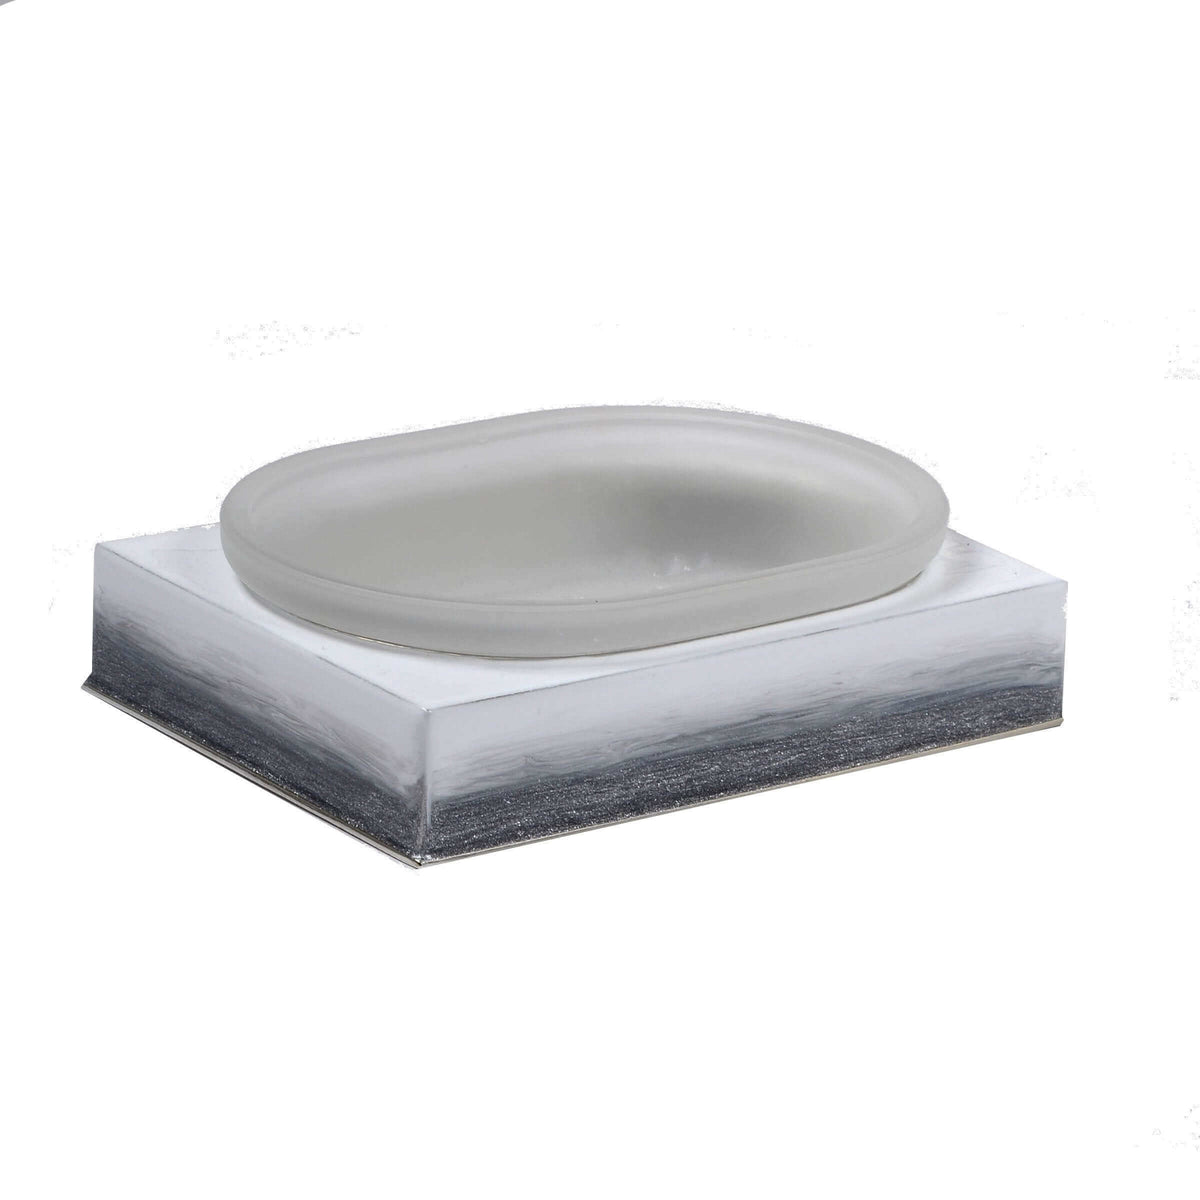 Mike + Ally - Ombre Soap Dish - 58031G - Grey - 